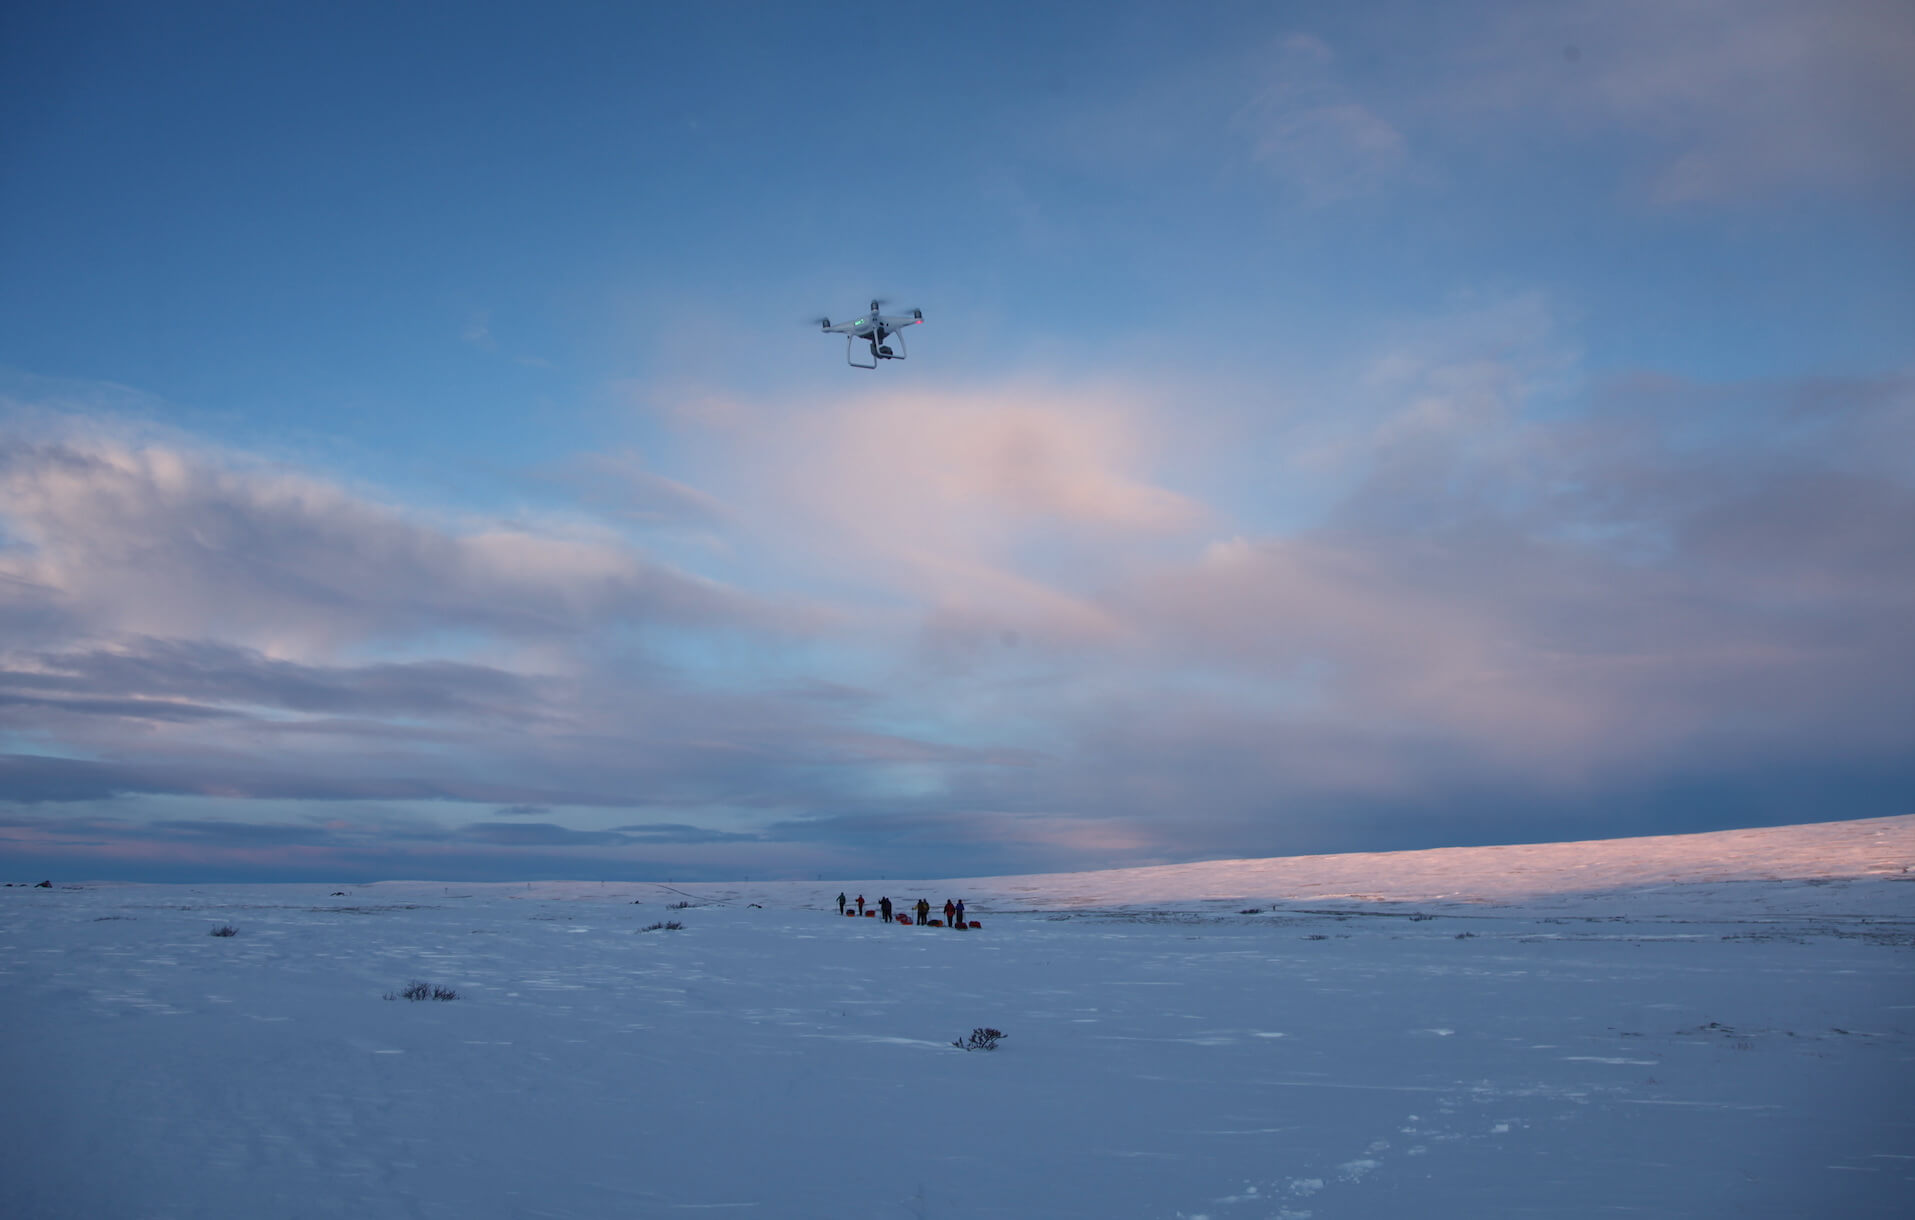 Snowy flat landscape with a drone flying in the peach and blue sky with some clouds and a group of people in the distance.